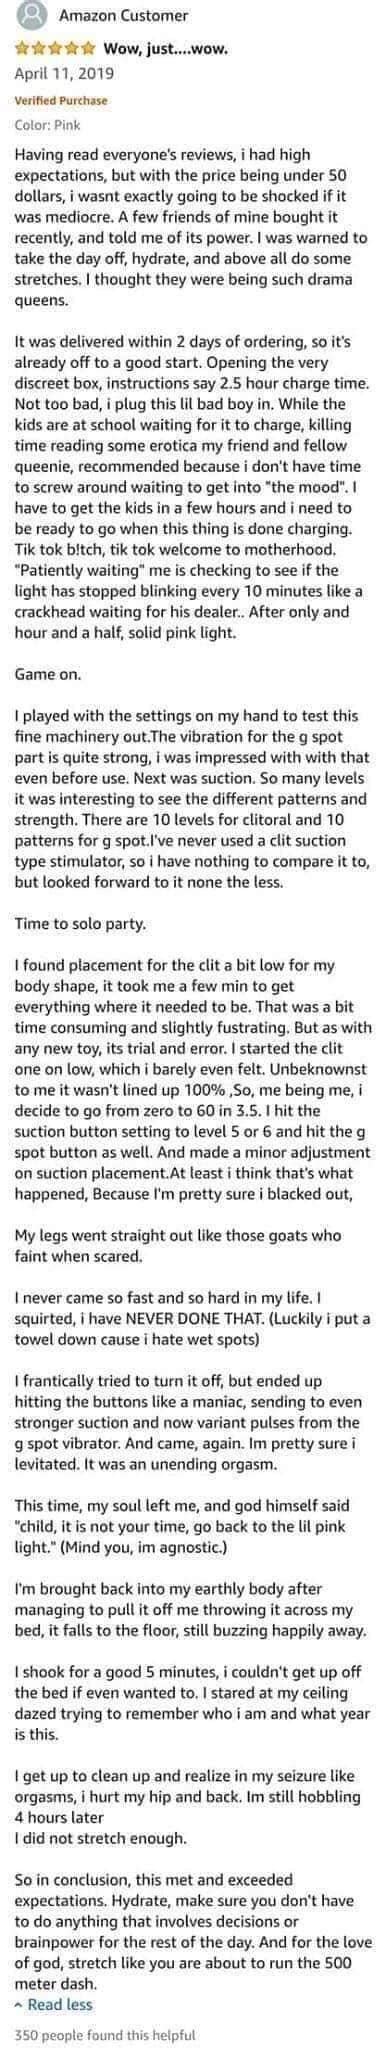 i don t have an interesting title it s a review for a sex toy read it